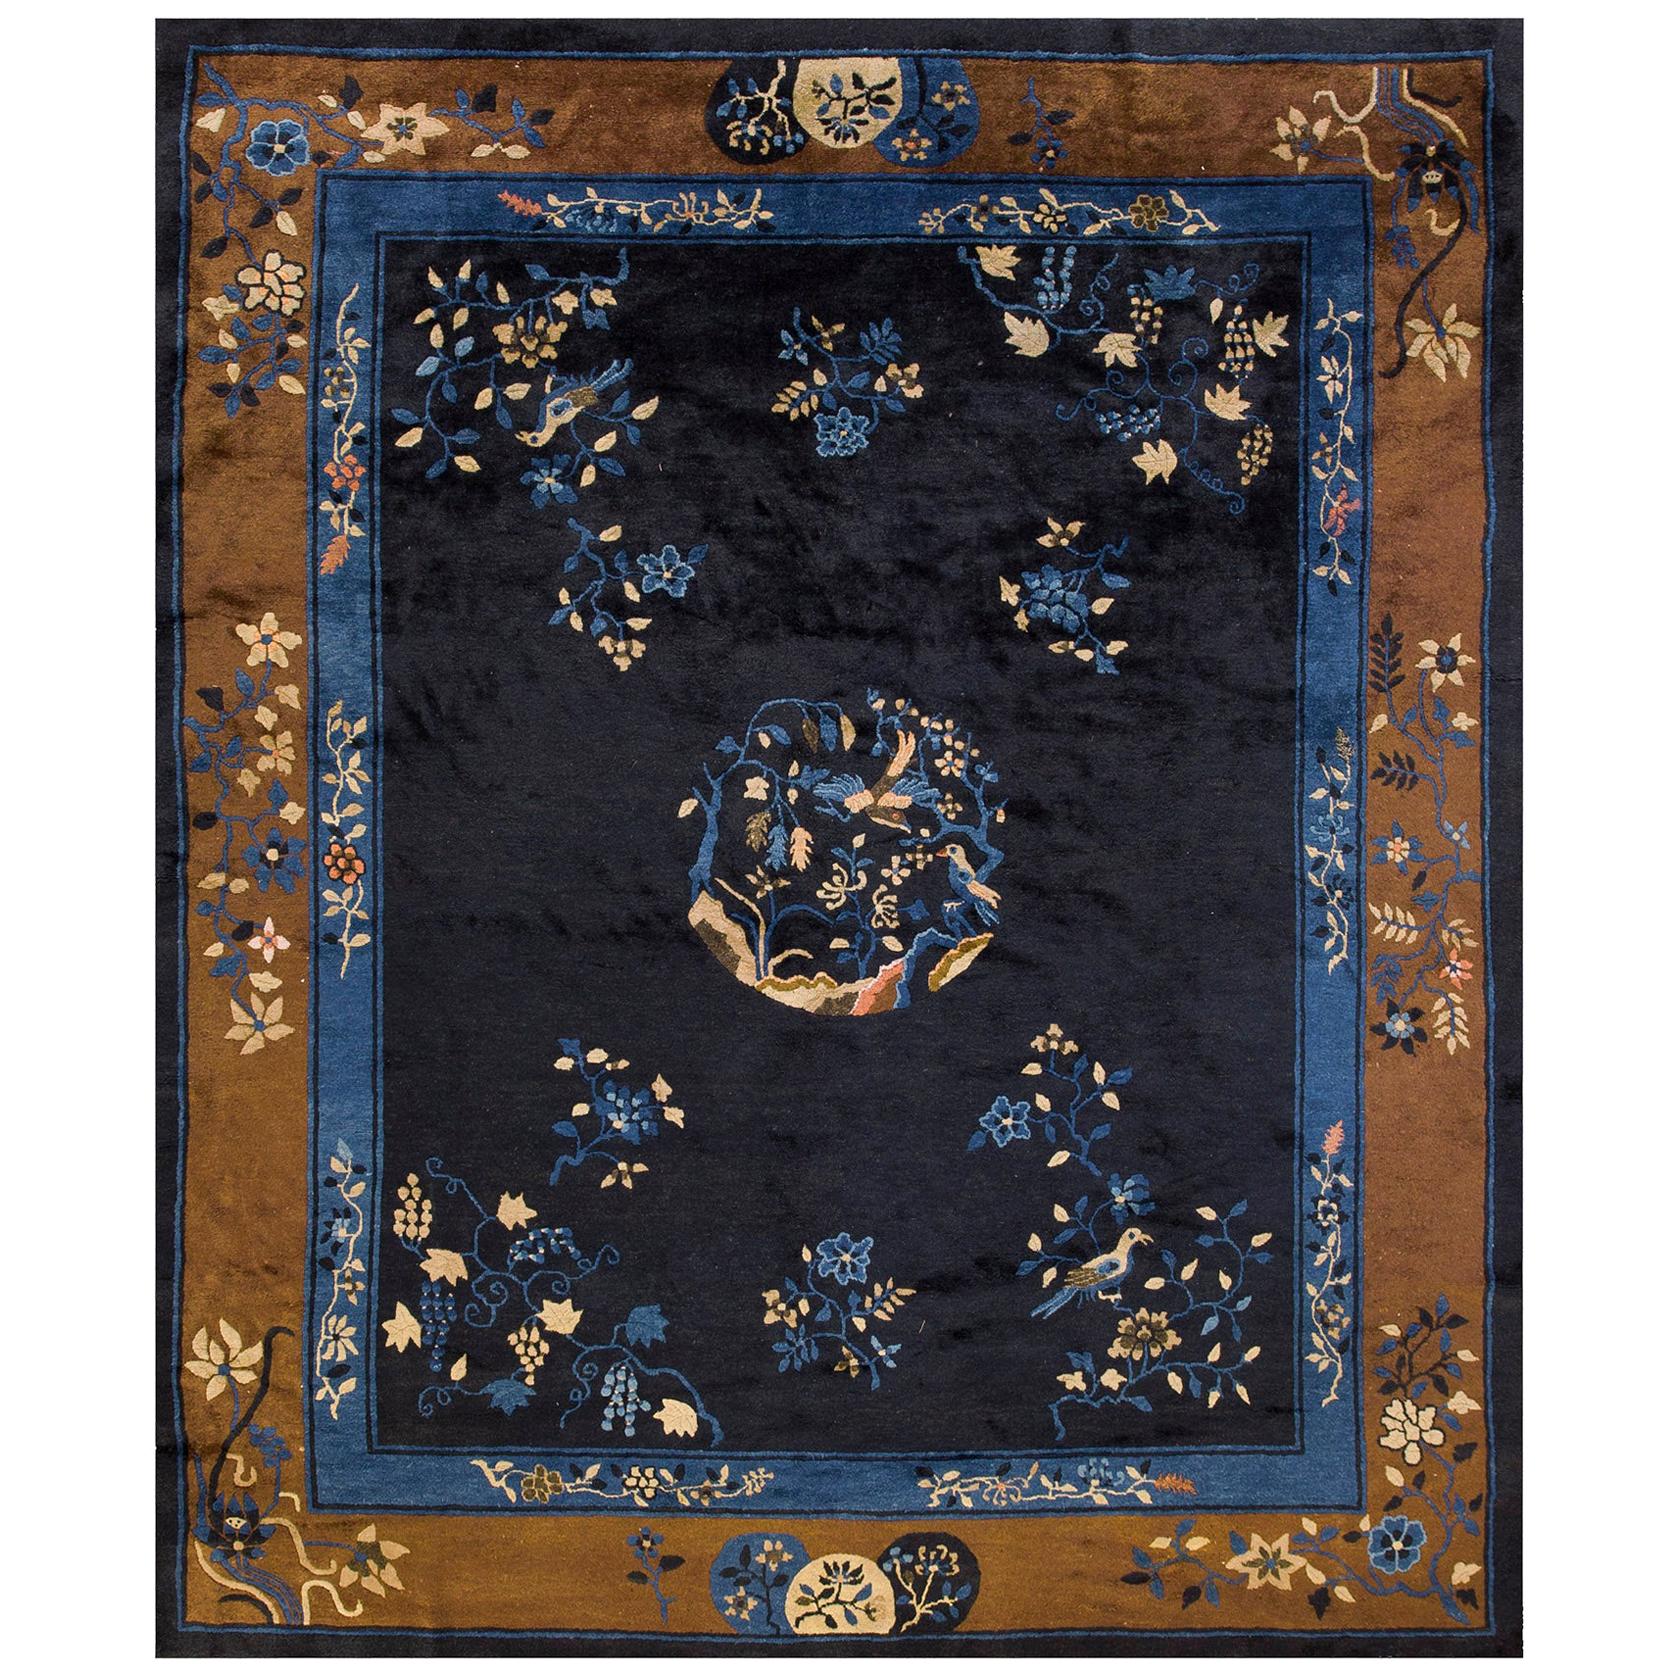 Antique Chinese Peking Rug 8' 2" x 9' 8". For Sale